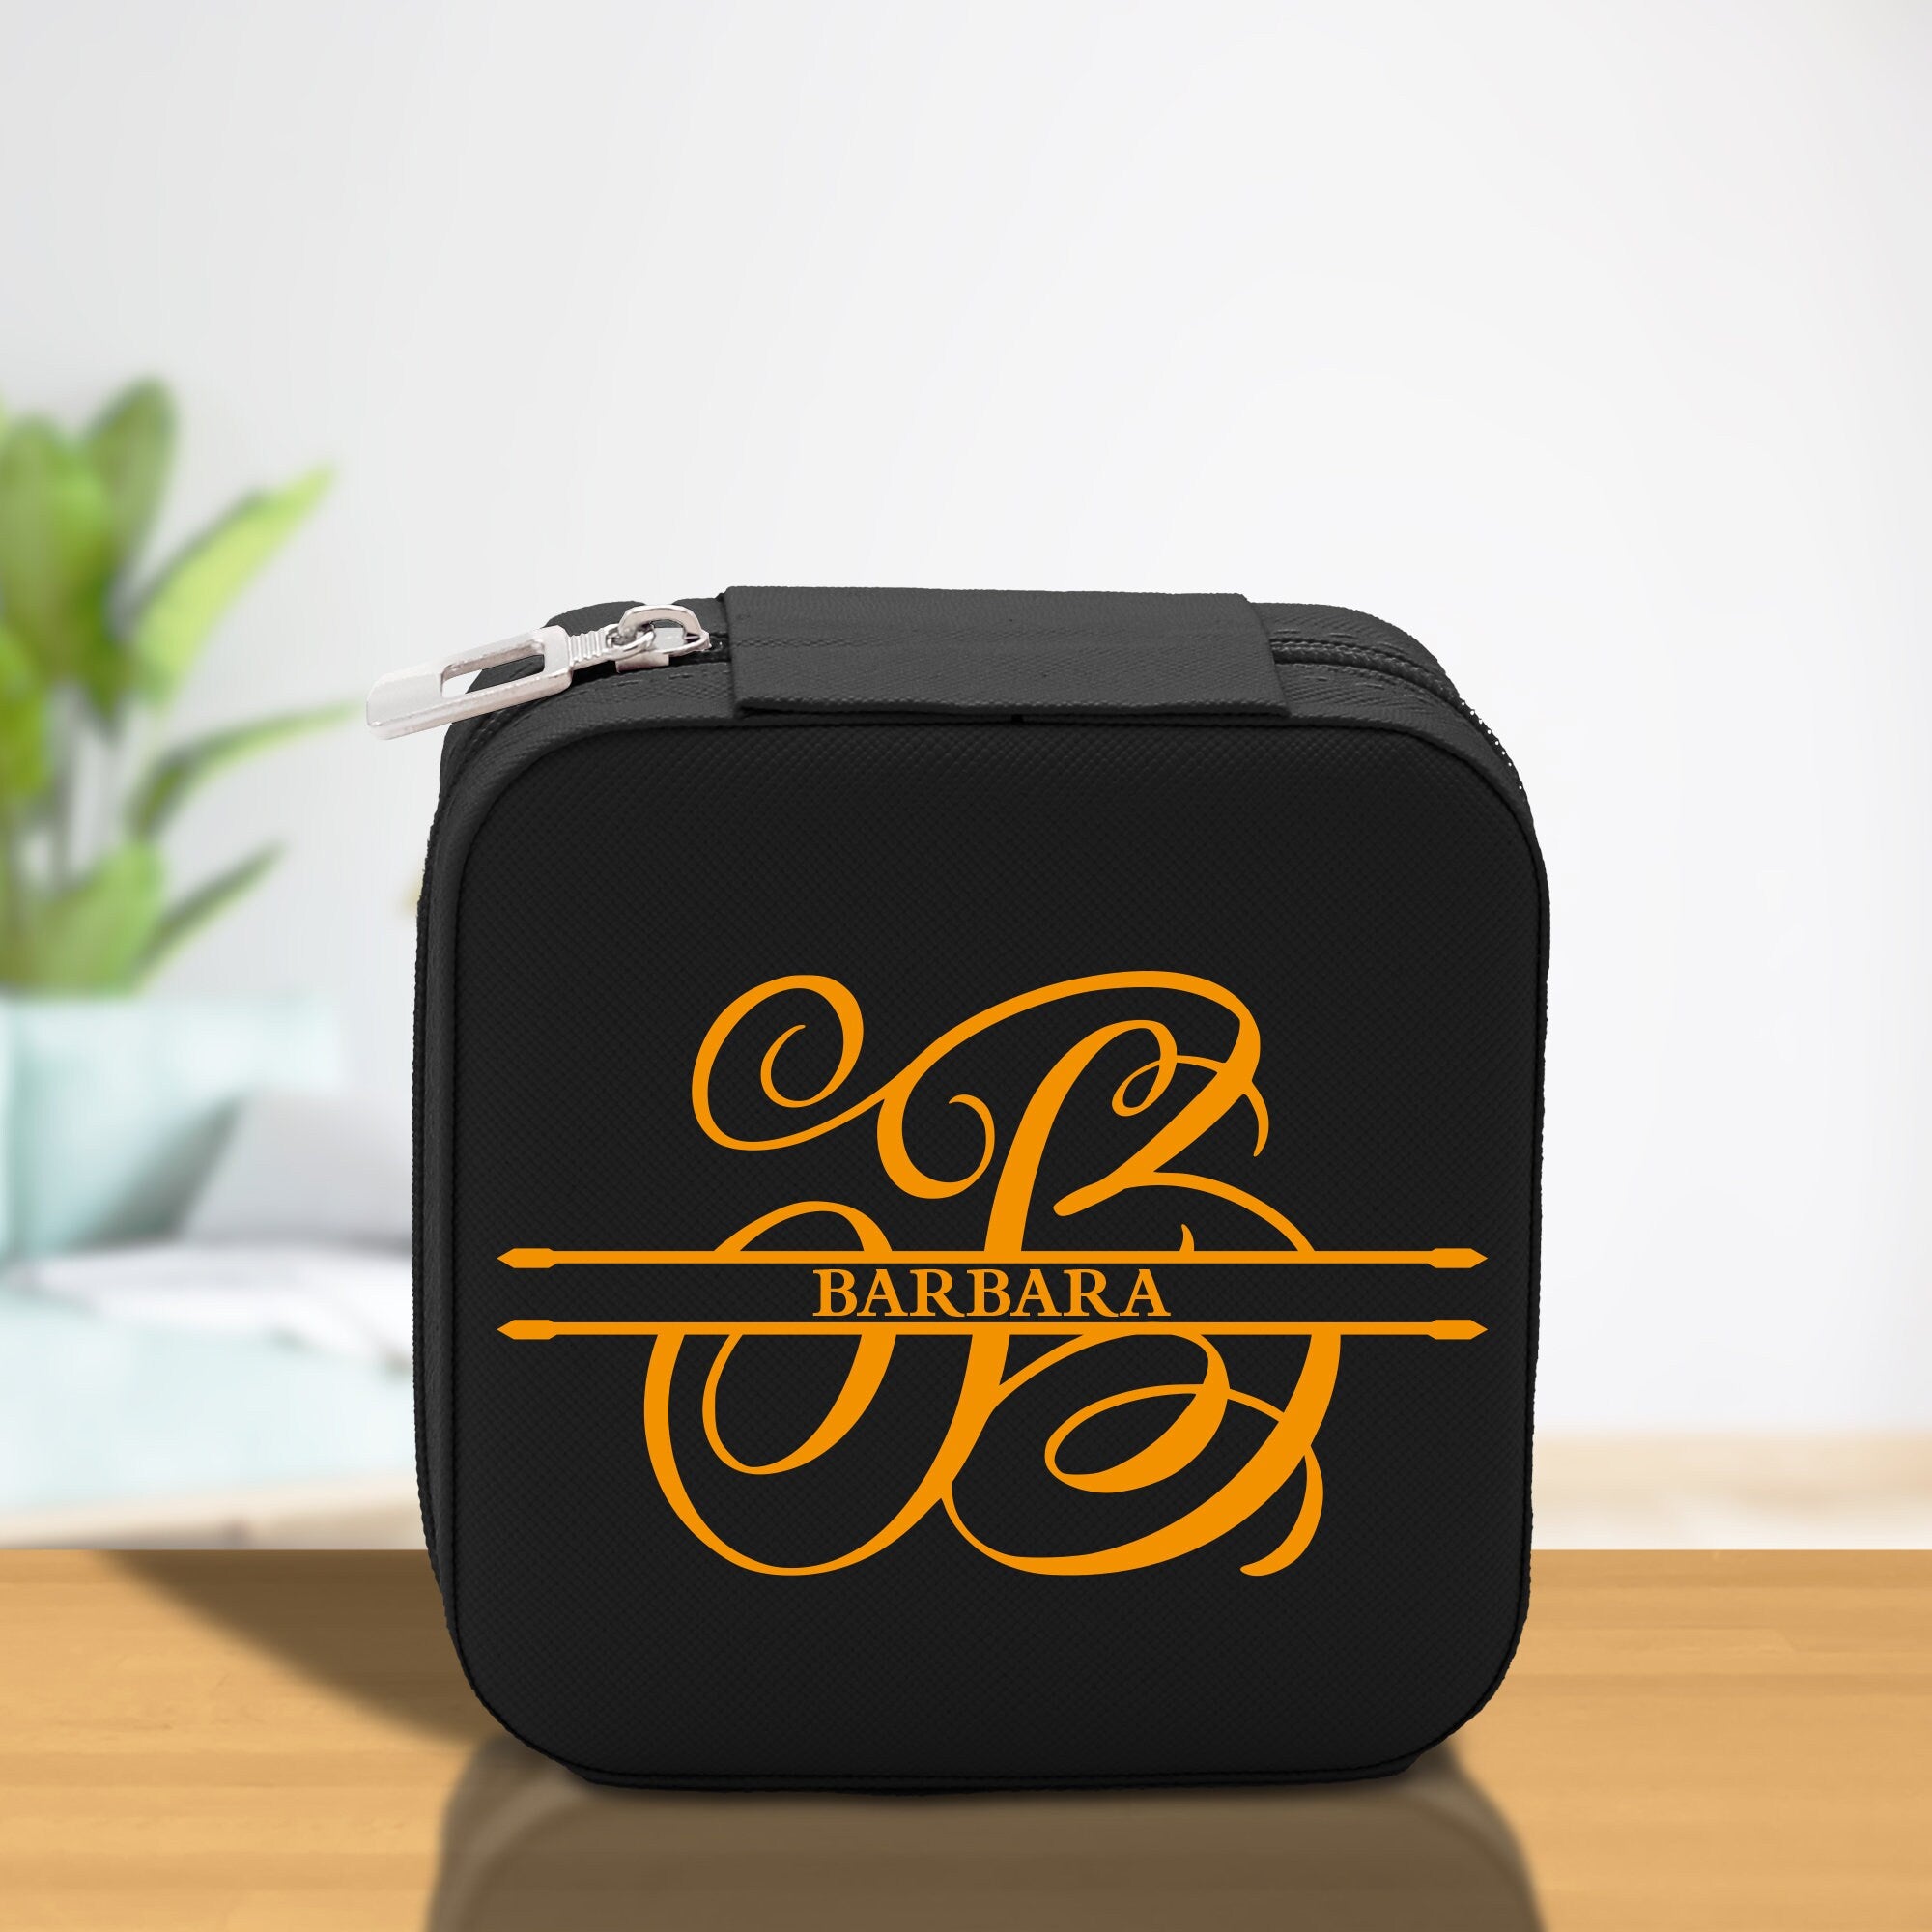 a black and yellow lunch box with a monogrammed logo